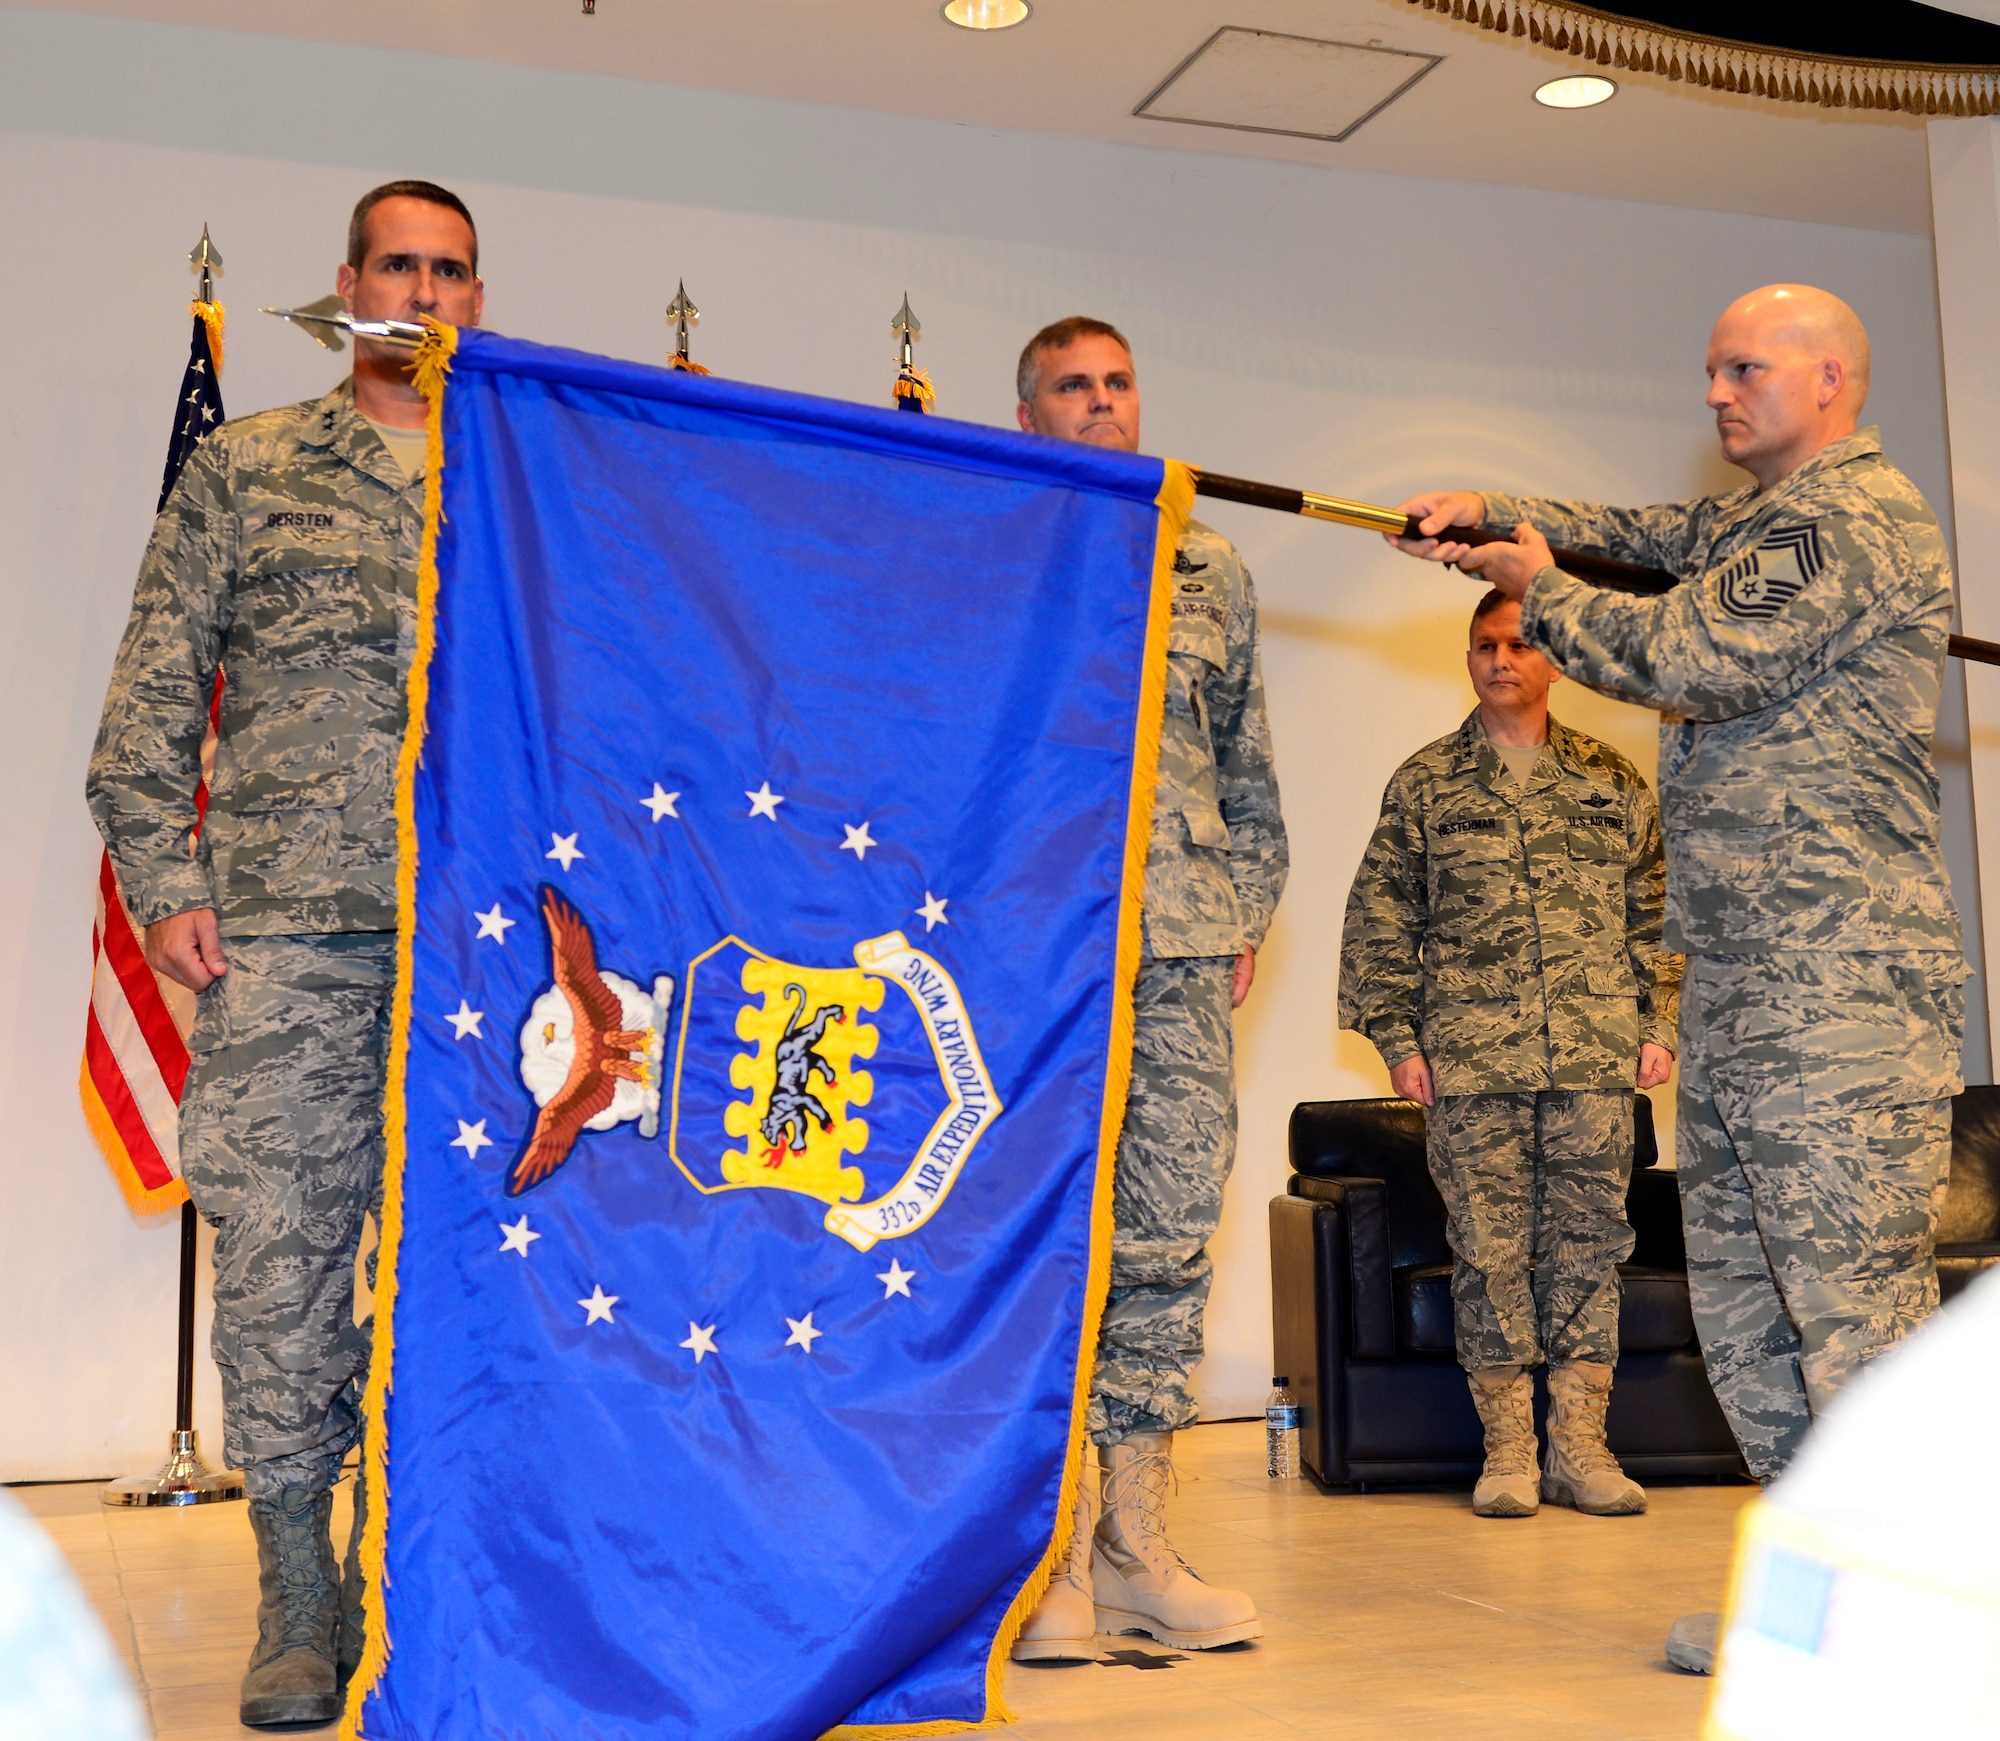 The 332nd Air Expeditionary Wing guidon was unfurled during an activation and assumption of command ceremony at an undisclosed location in Southwest Asia May 19, 2015. The 332nd AEW has a distinguished lineage, which includes the 332nd Air Expeditionary Group, the famed Tuskegee Airmen, also known as the Red Tails. (U.S. Air Force photo by Senior Airman Racheal E. Watson)